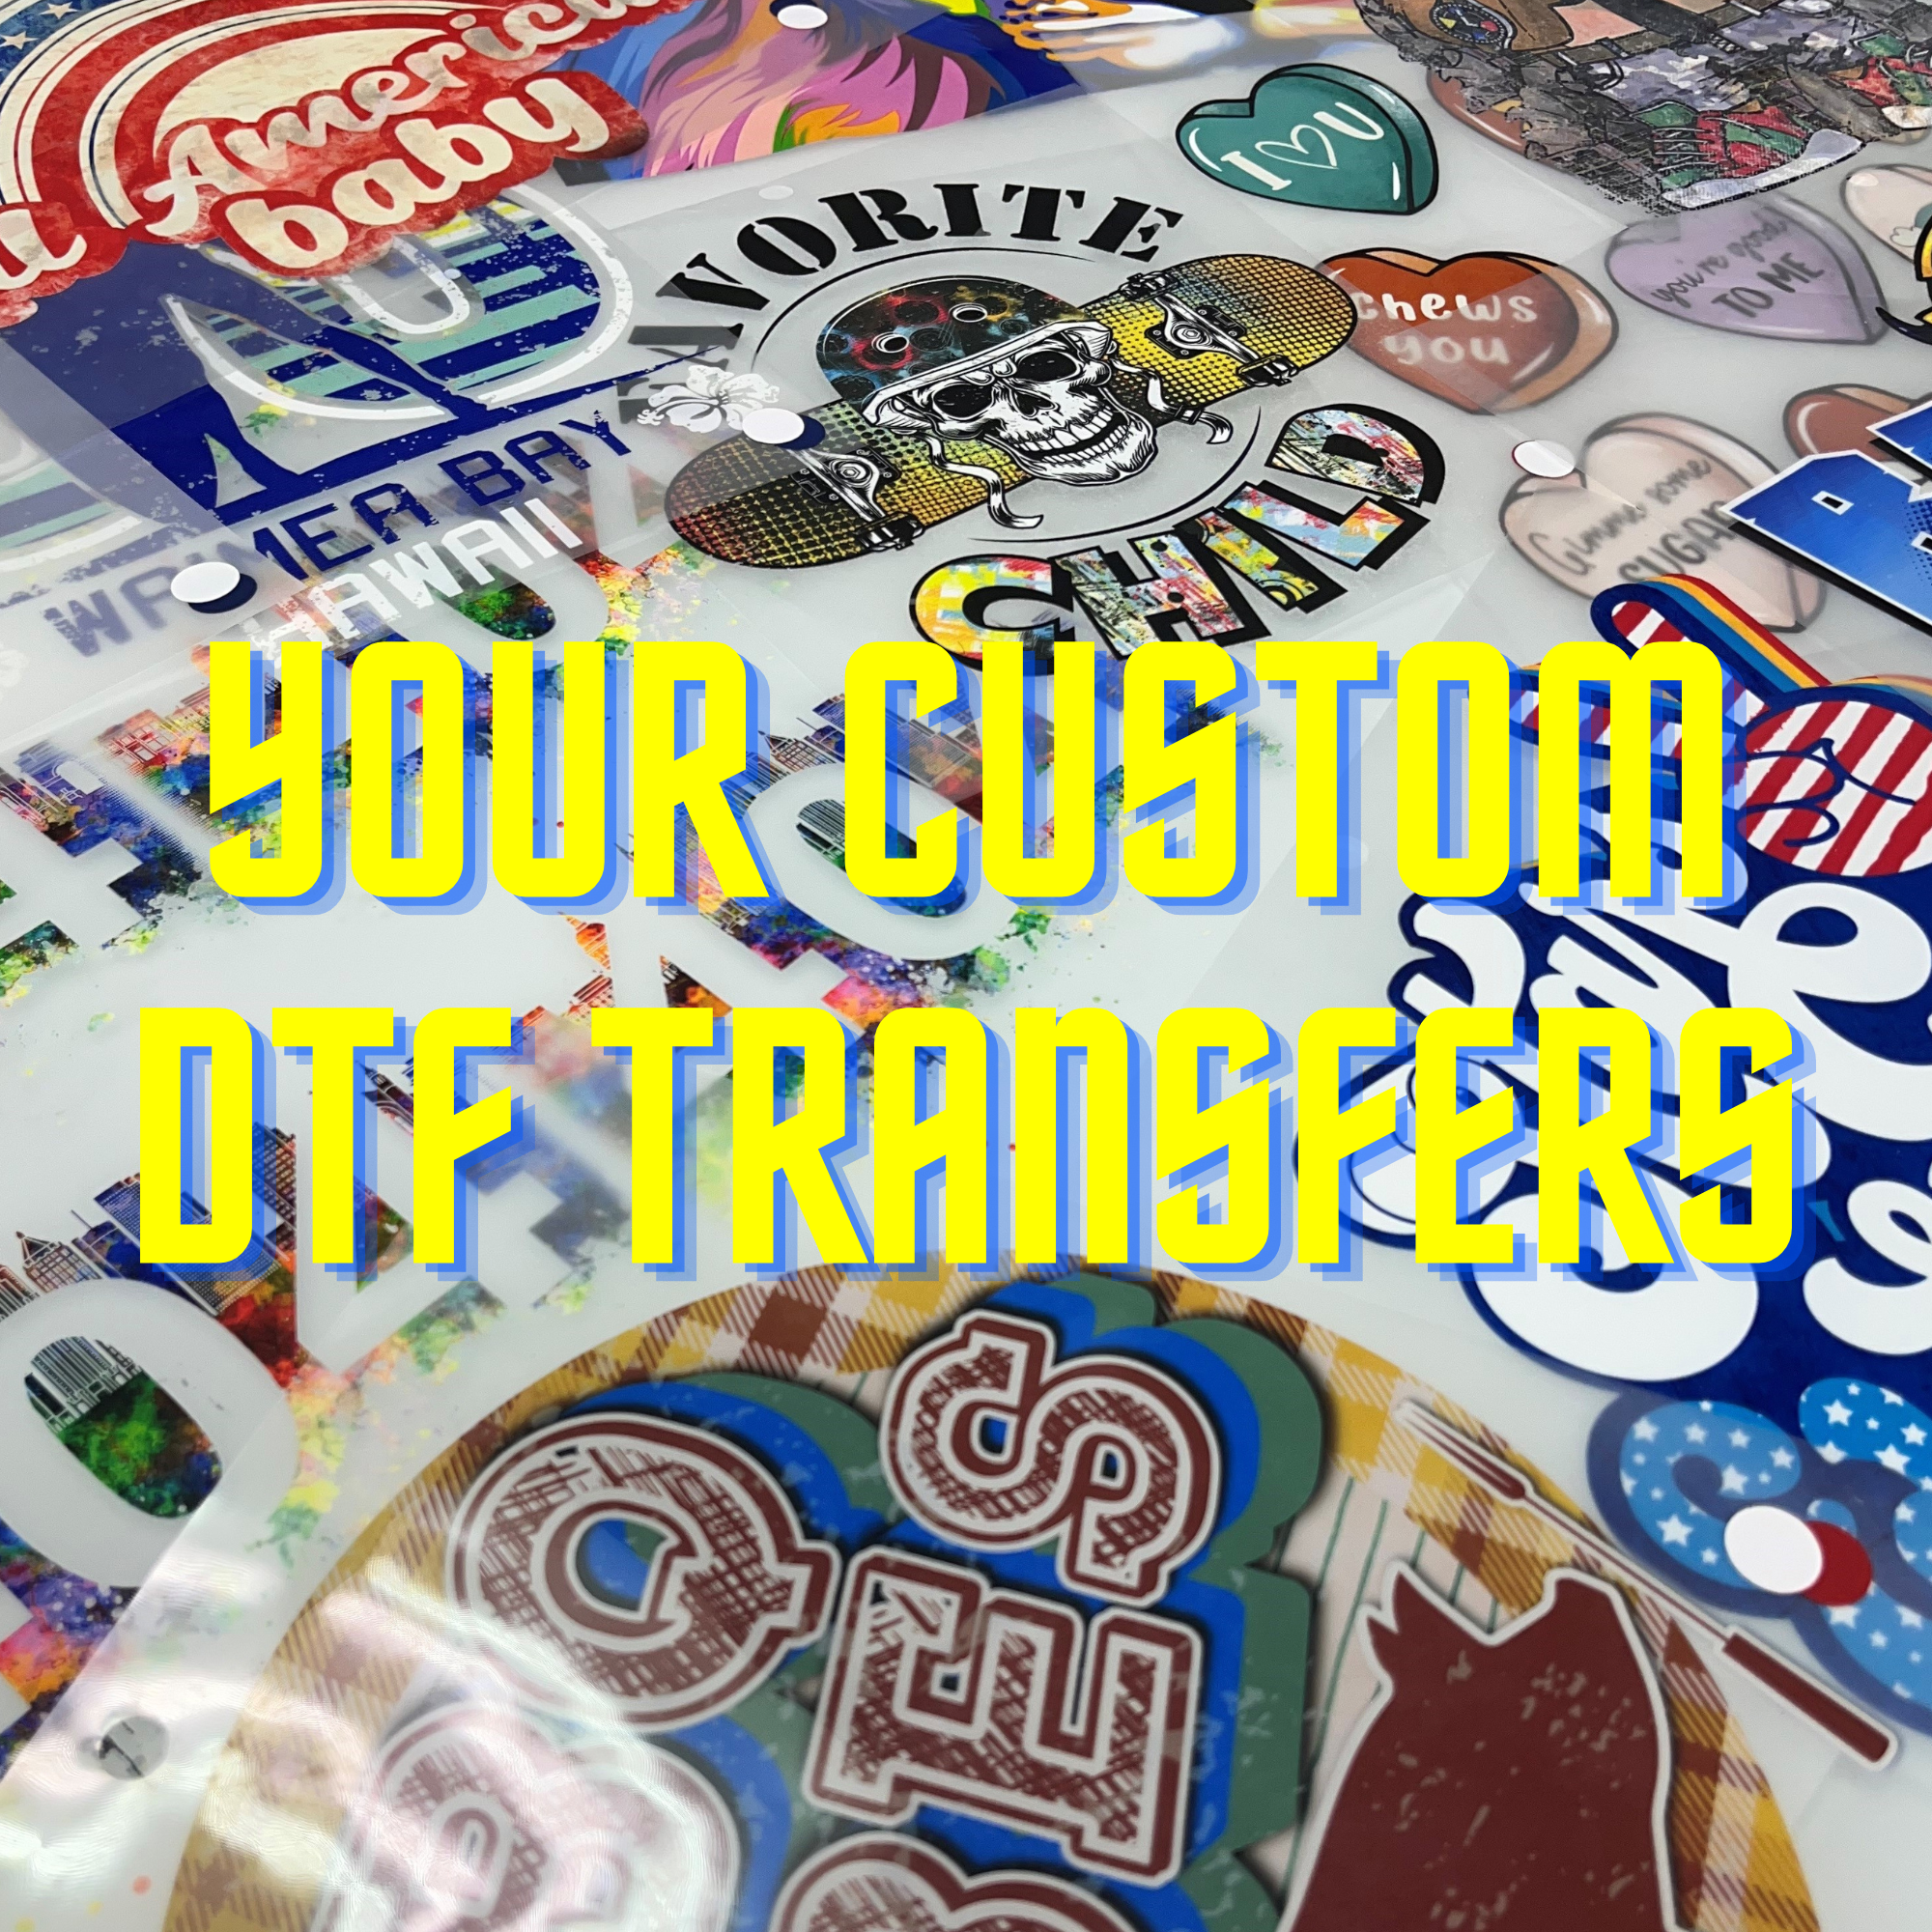 Transfer your designs to bags with DTF printing film #customized